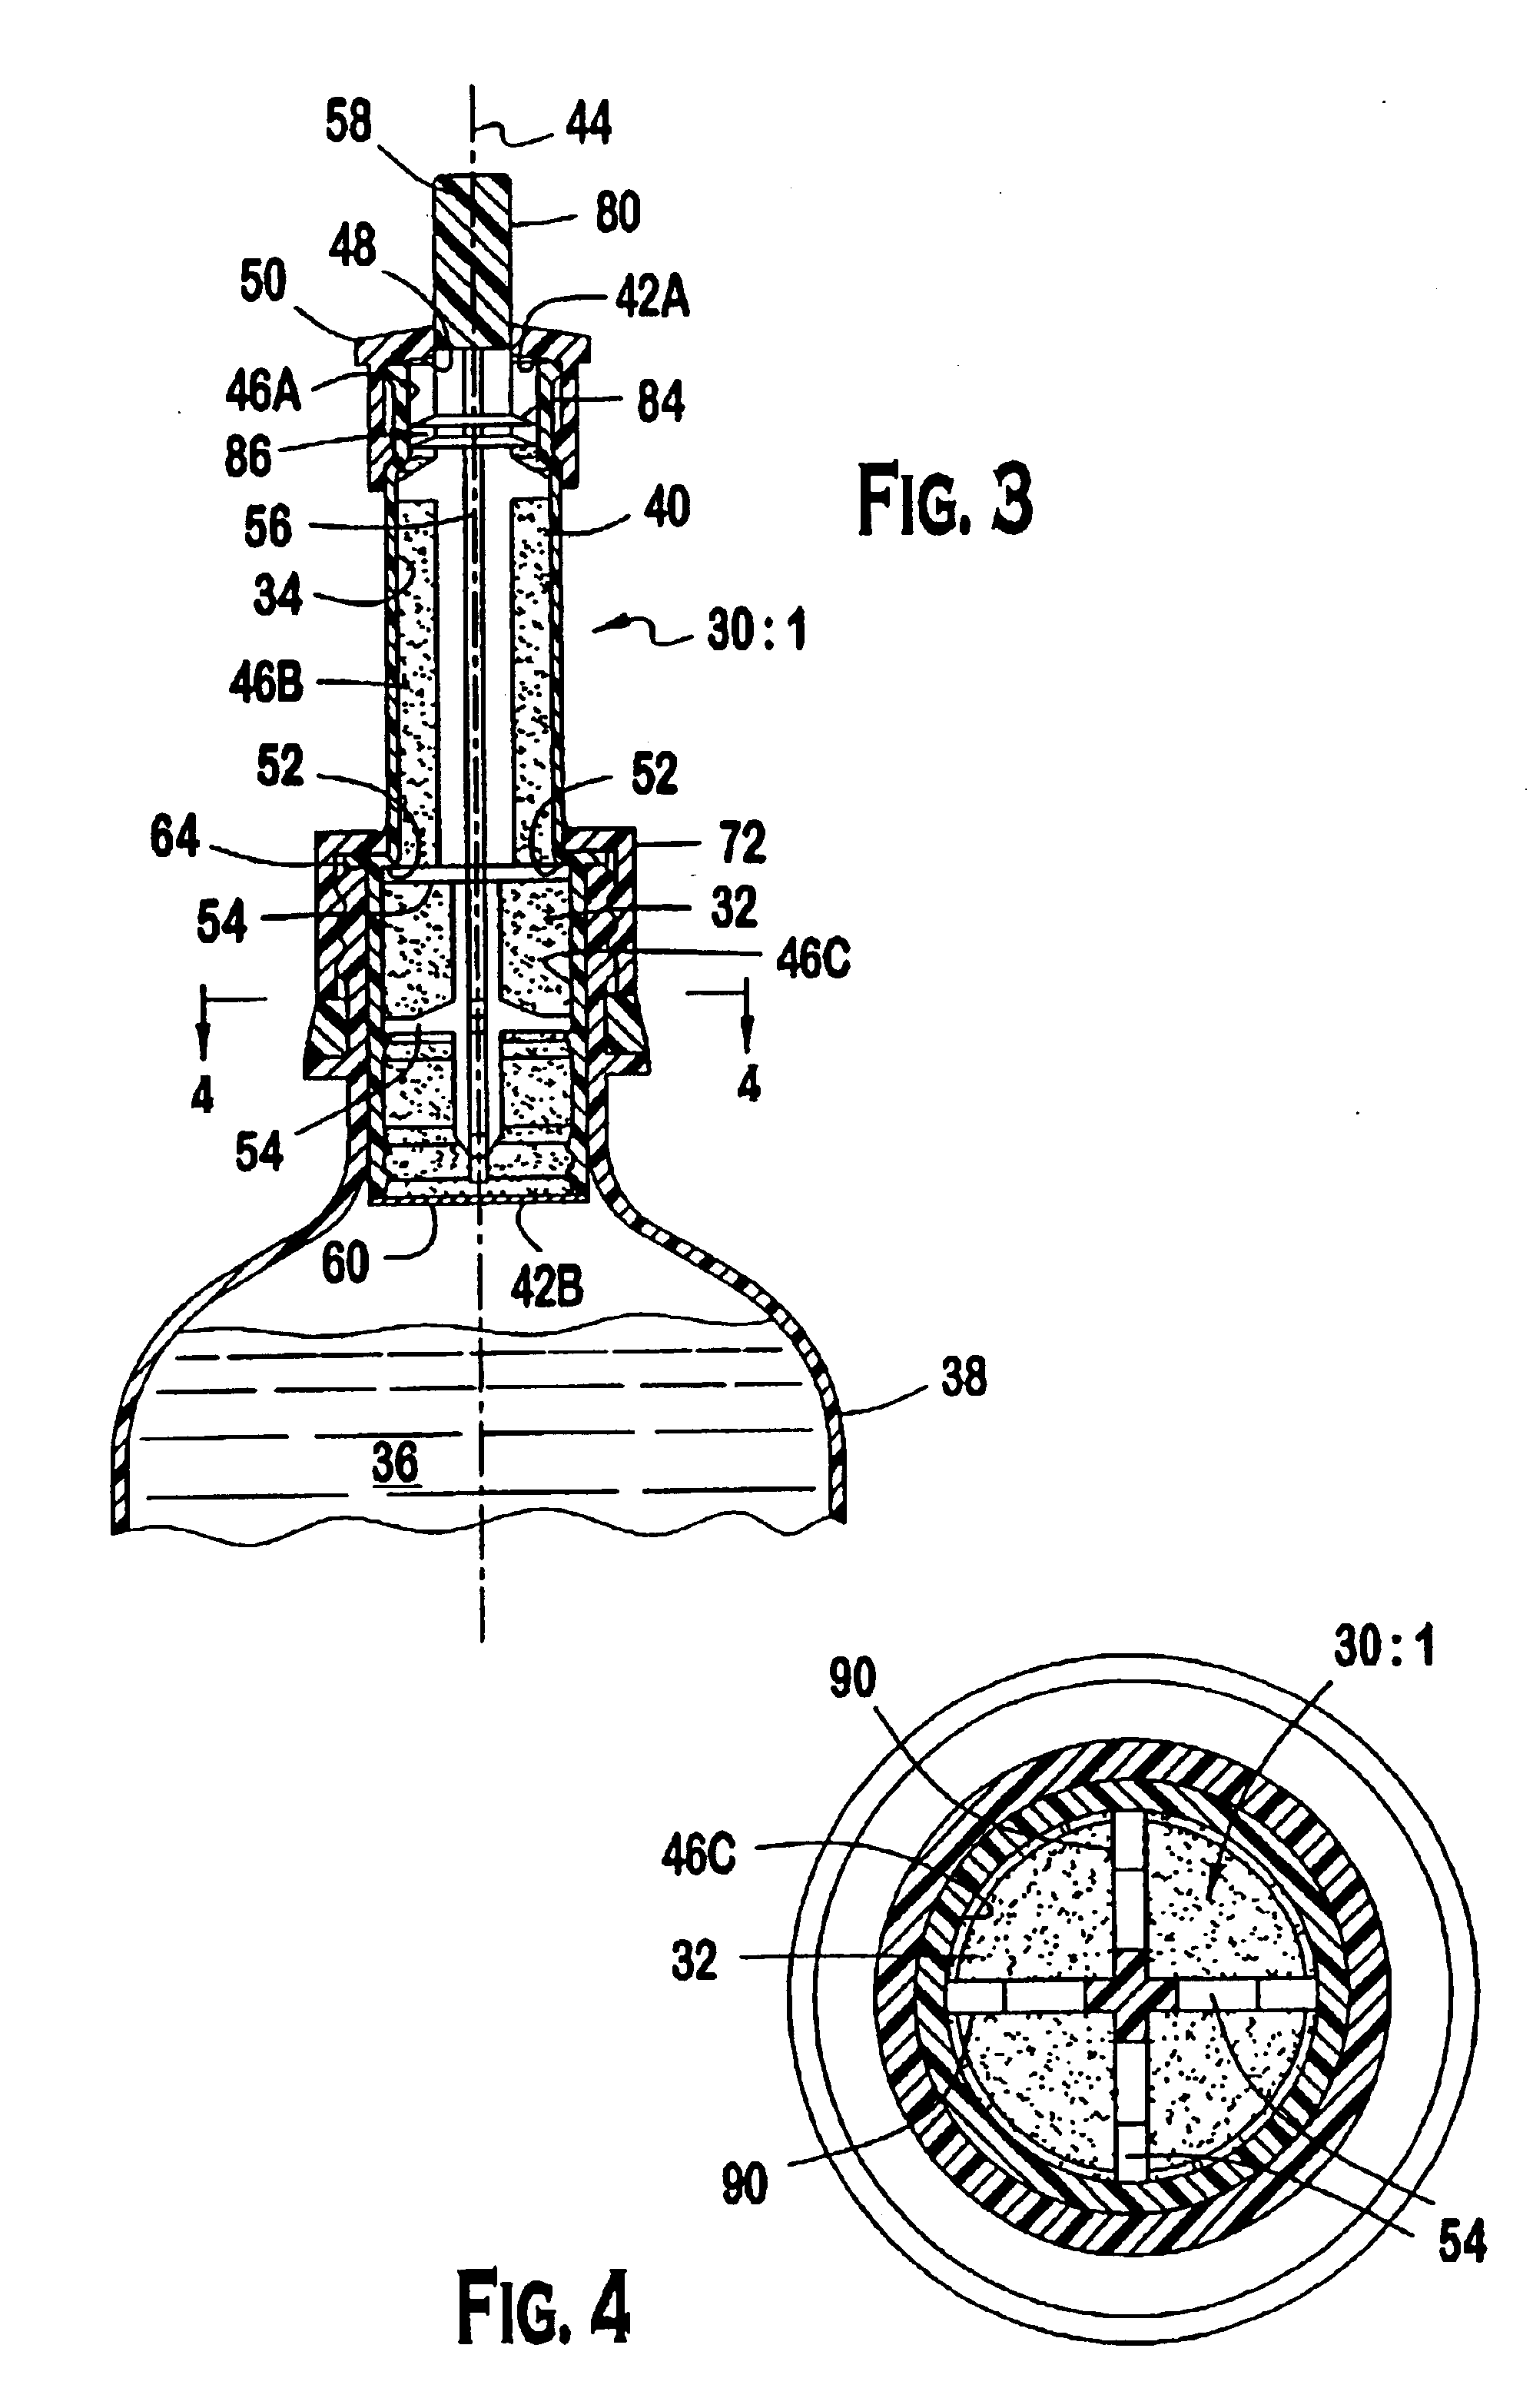 Flavoring component holding dispenser for use with consumable beverages